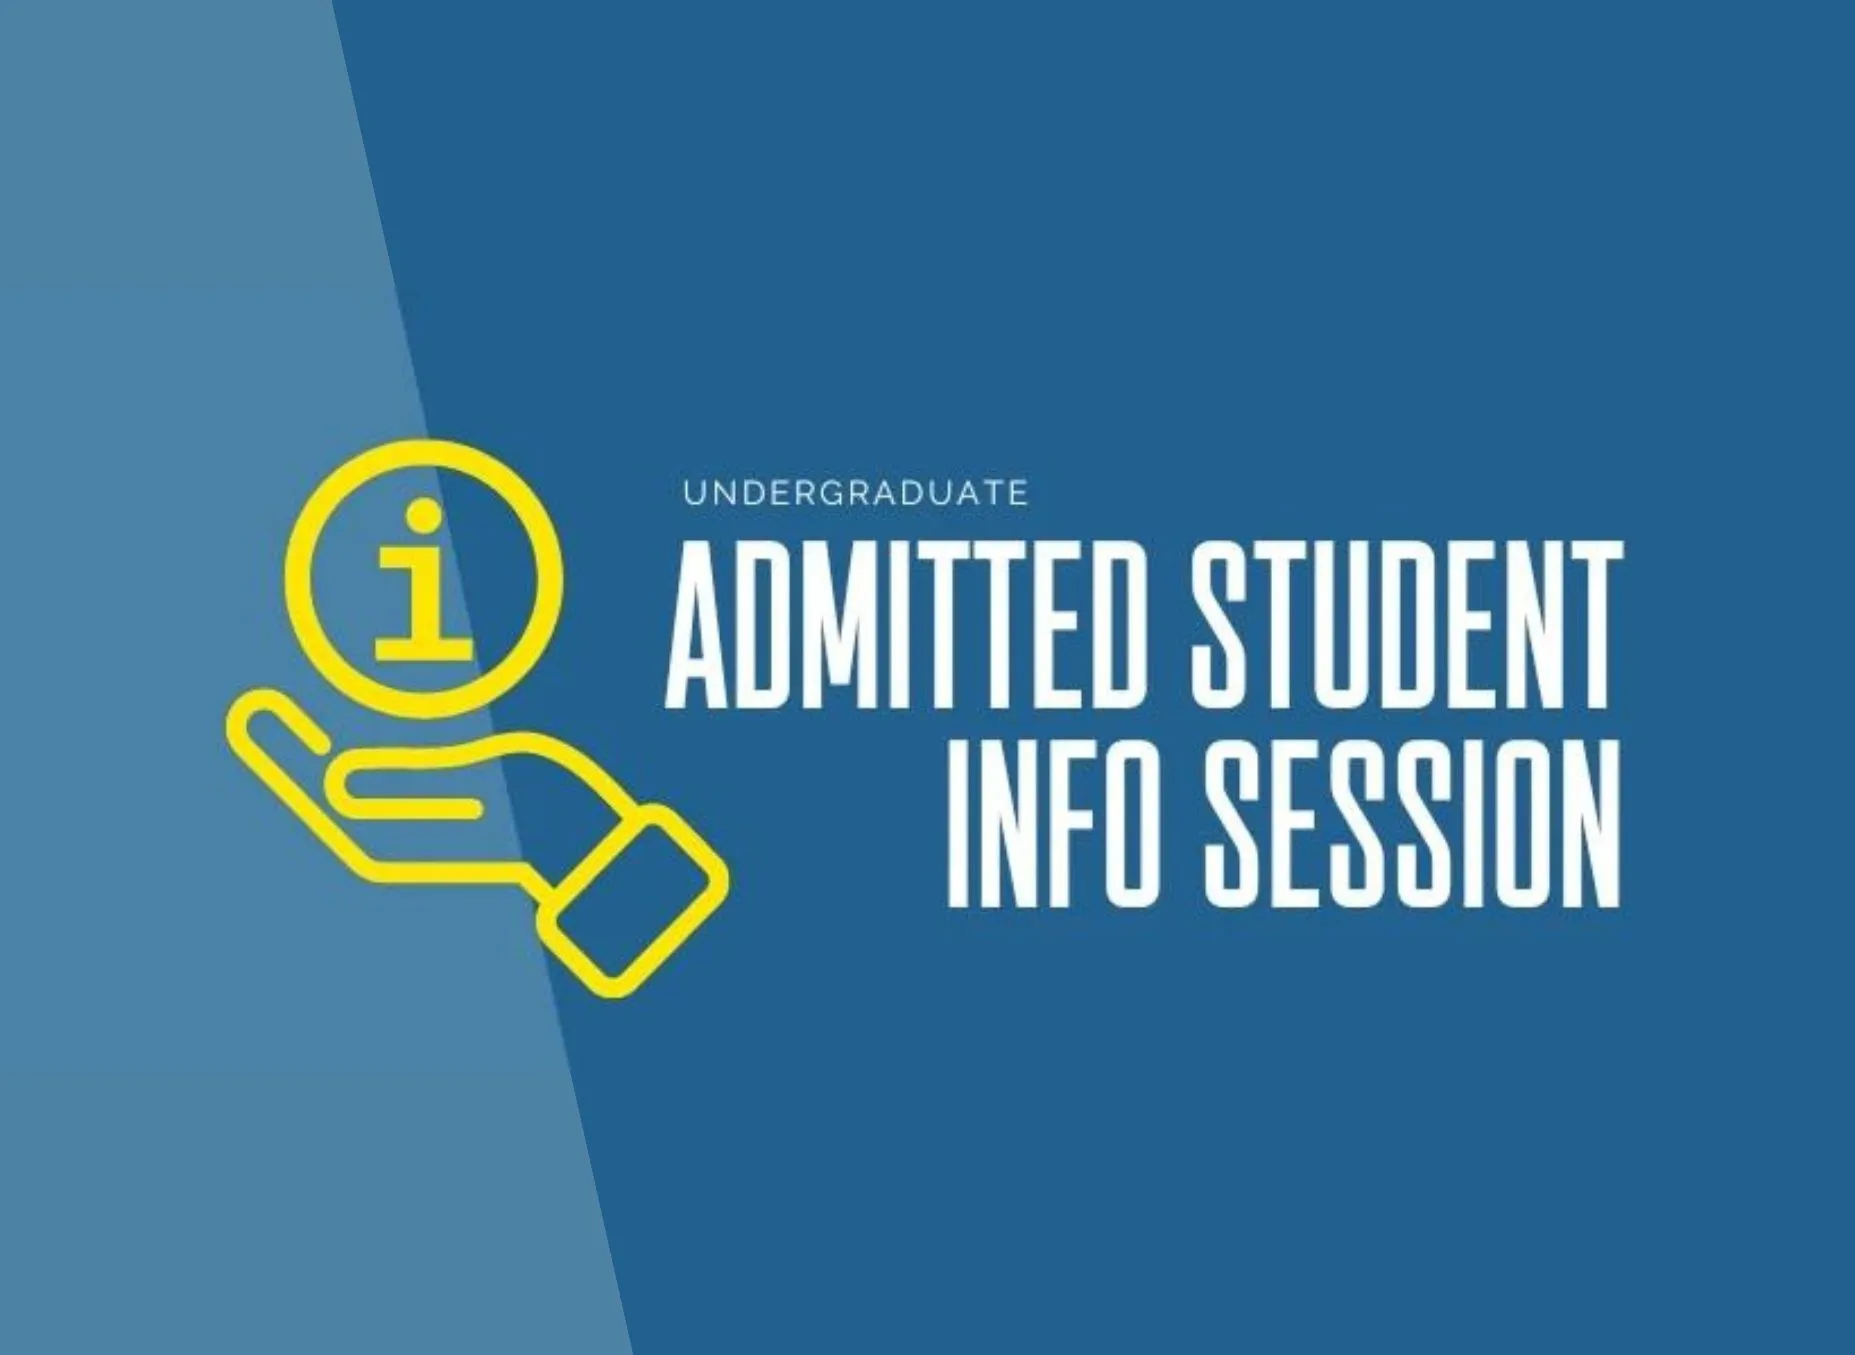 Admitted Student Info Session event graphic